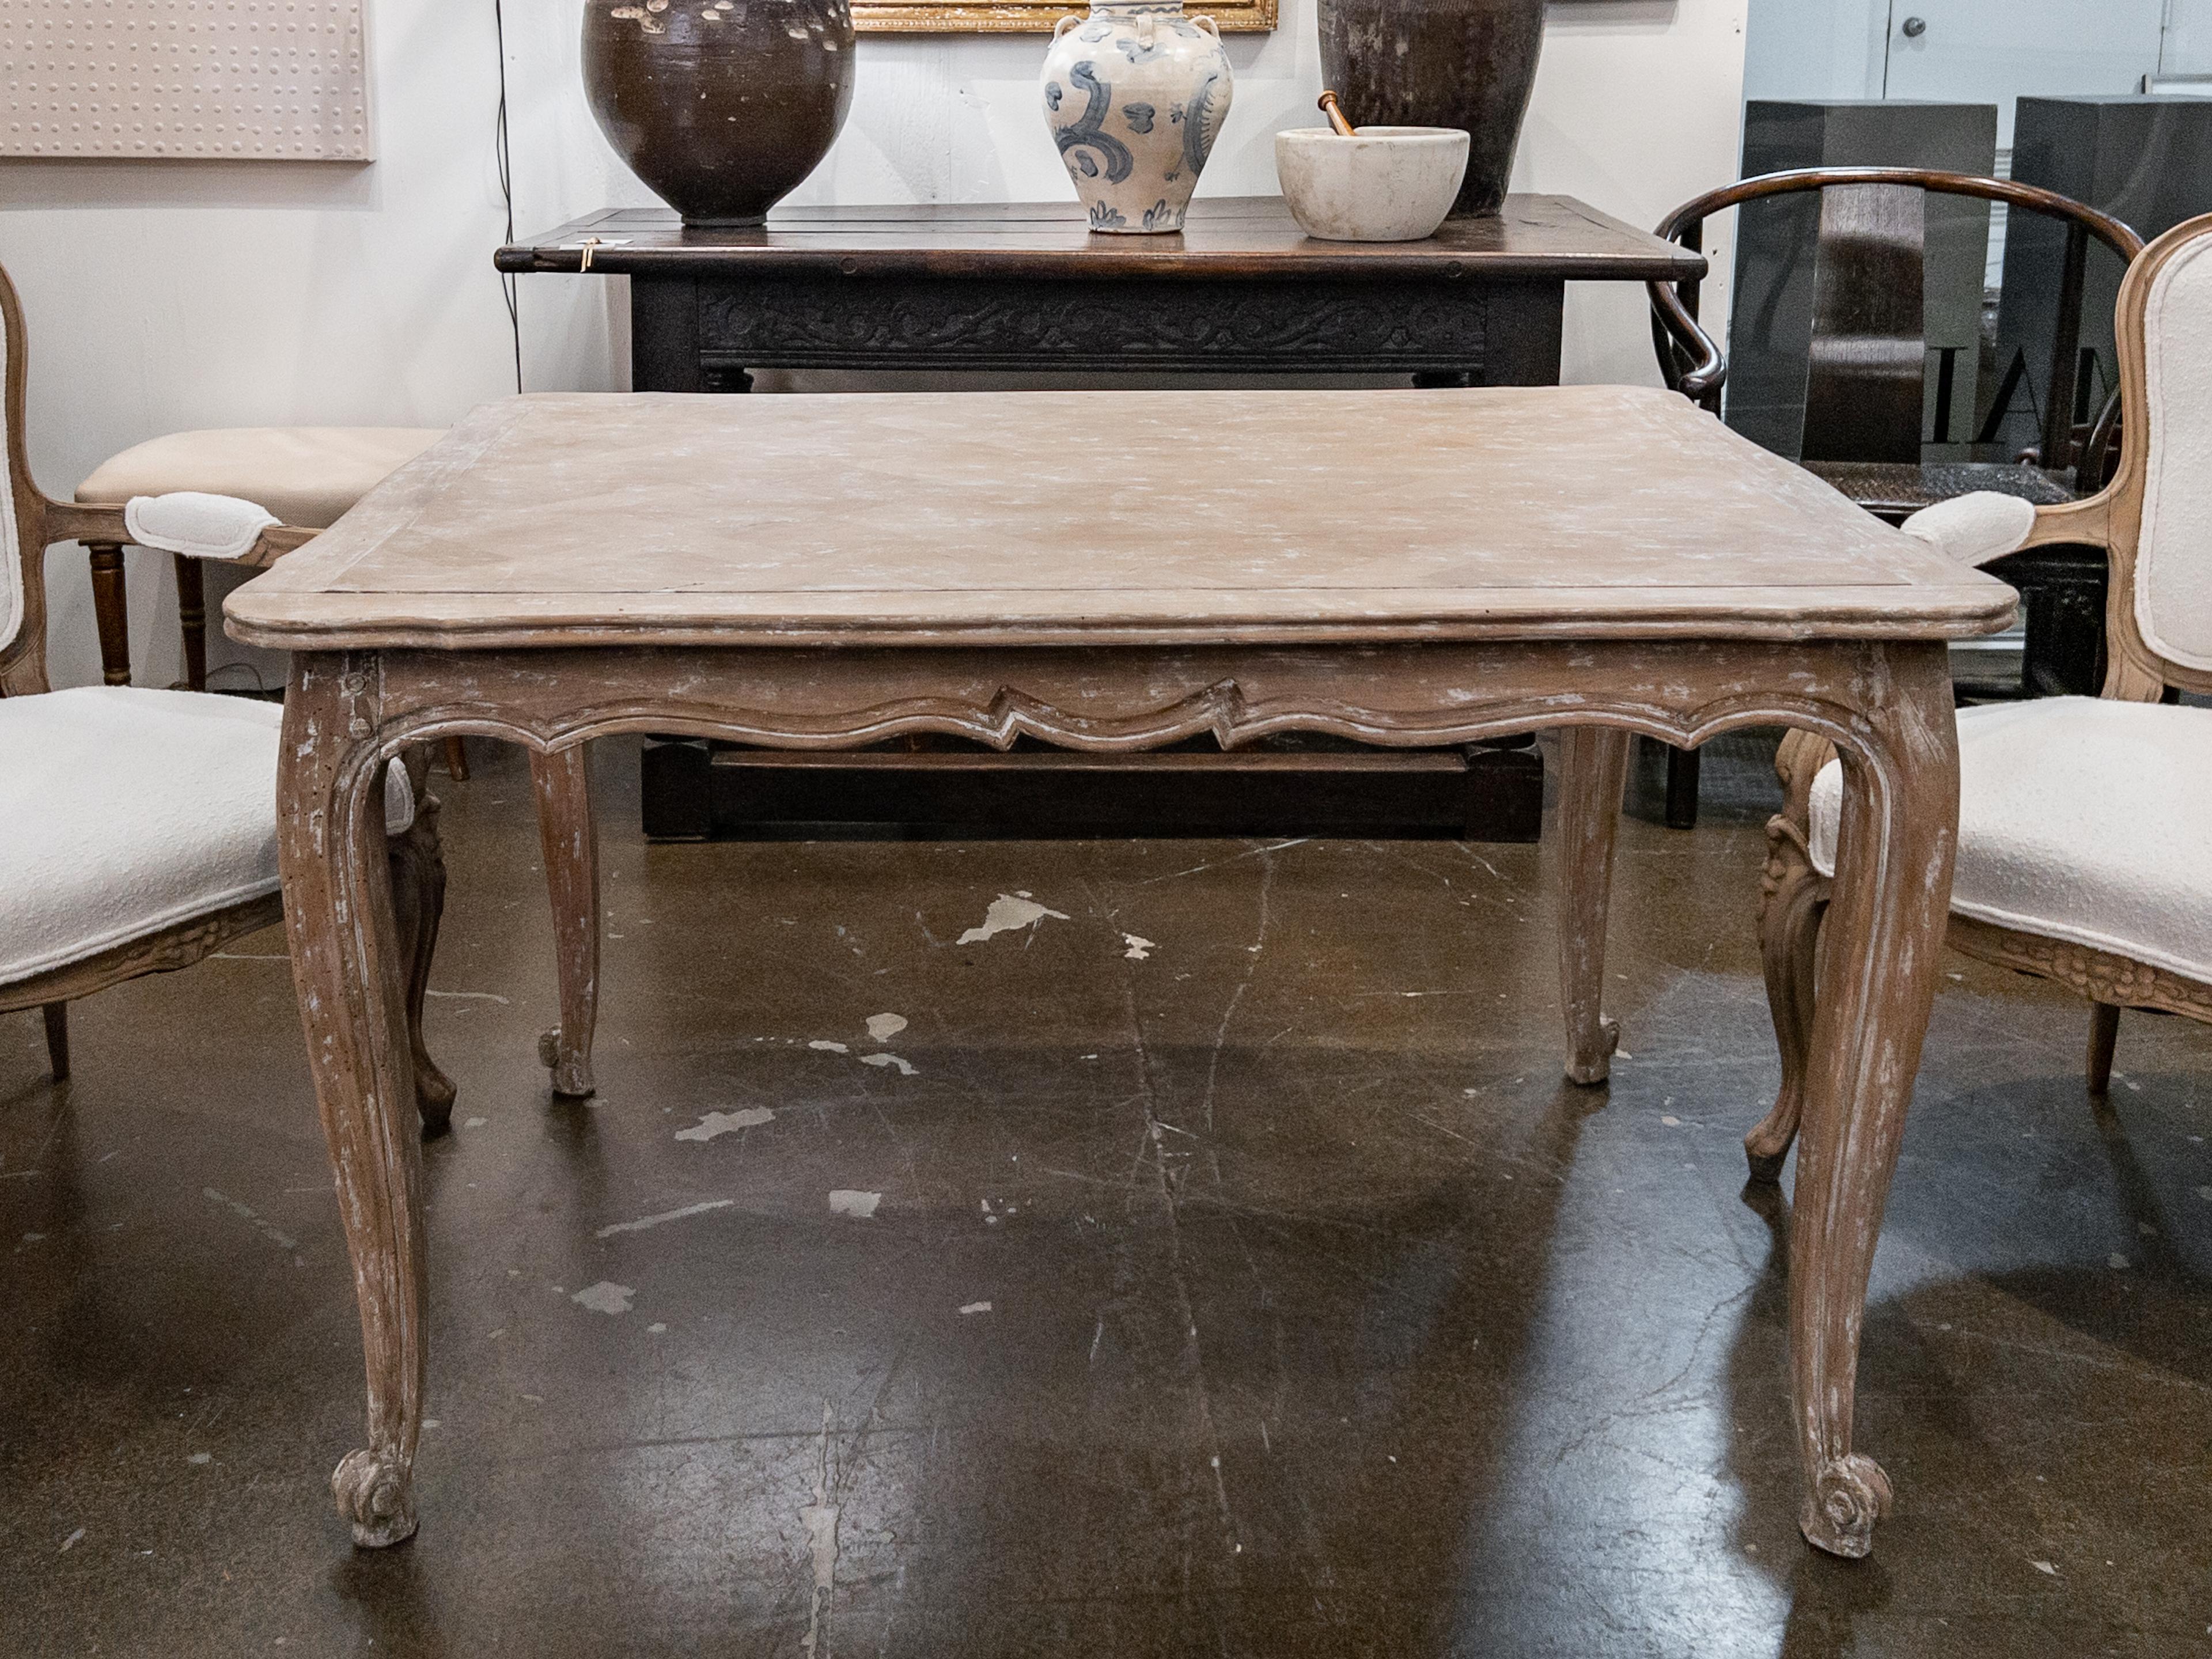 Louis XV Style Small Swedish dining table with a scraped painted finish, parquet pattern top, scalloped apron and cabriole legs.